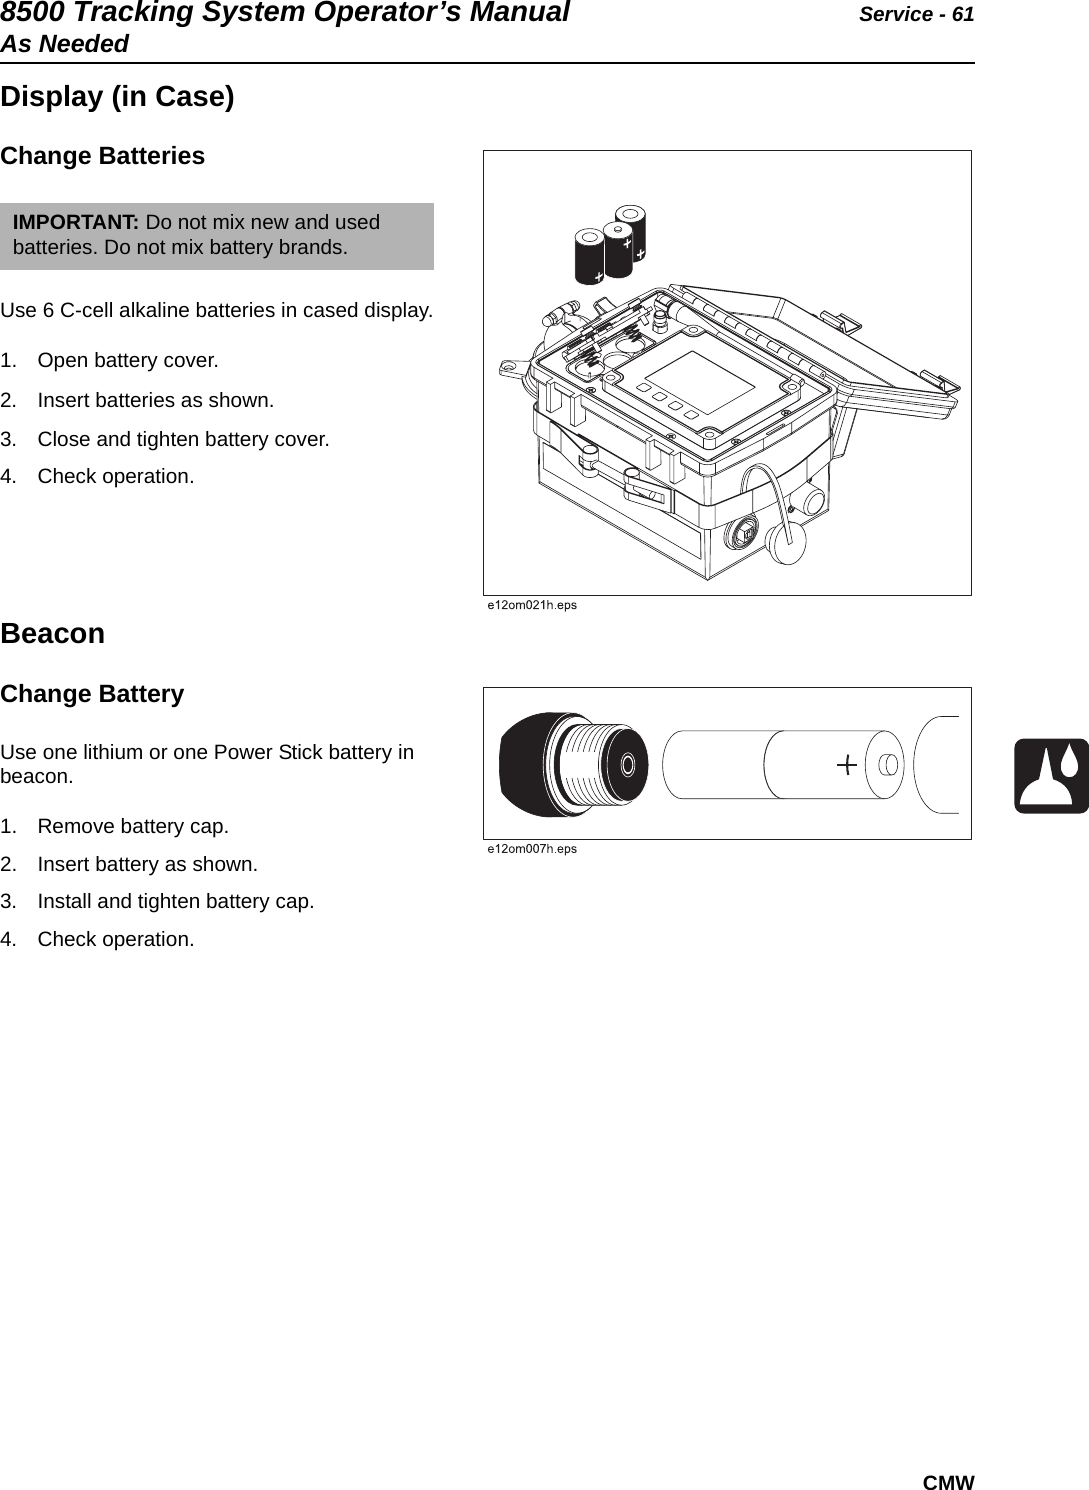 8500 Tracking System Operator’s Manual Service - 61As NeededCMWDisplay (in Case)Change Batteries Use 6 C-cell alkaline batteries in cased display.1. Open battery cover. 2. Insert batteries as shown.  3. Close and tighten battery cover.4. Check operation. BeaconChange Battery Use one lithium or one Power Stick battery in beacon. 1. Remove battery cap. 2. Insert battery as shown. 3. Install and tighten battery cap.4. Check operation.IMPORTANT: Do not mix new and used batteries. Do not mix battery brands.